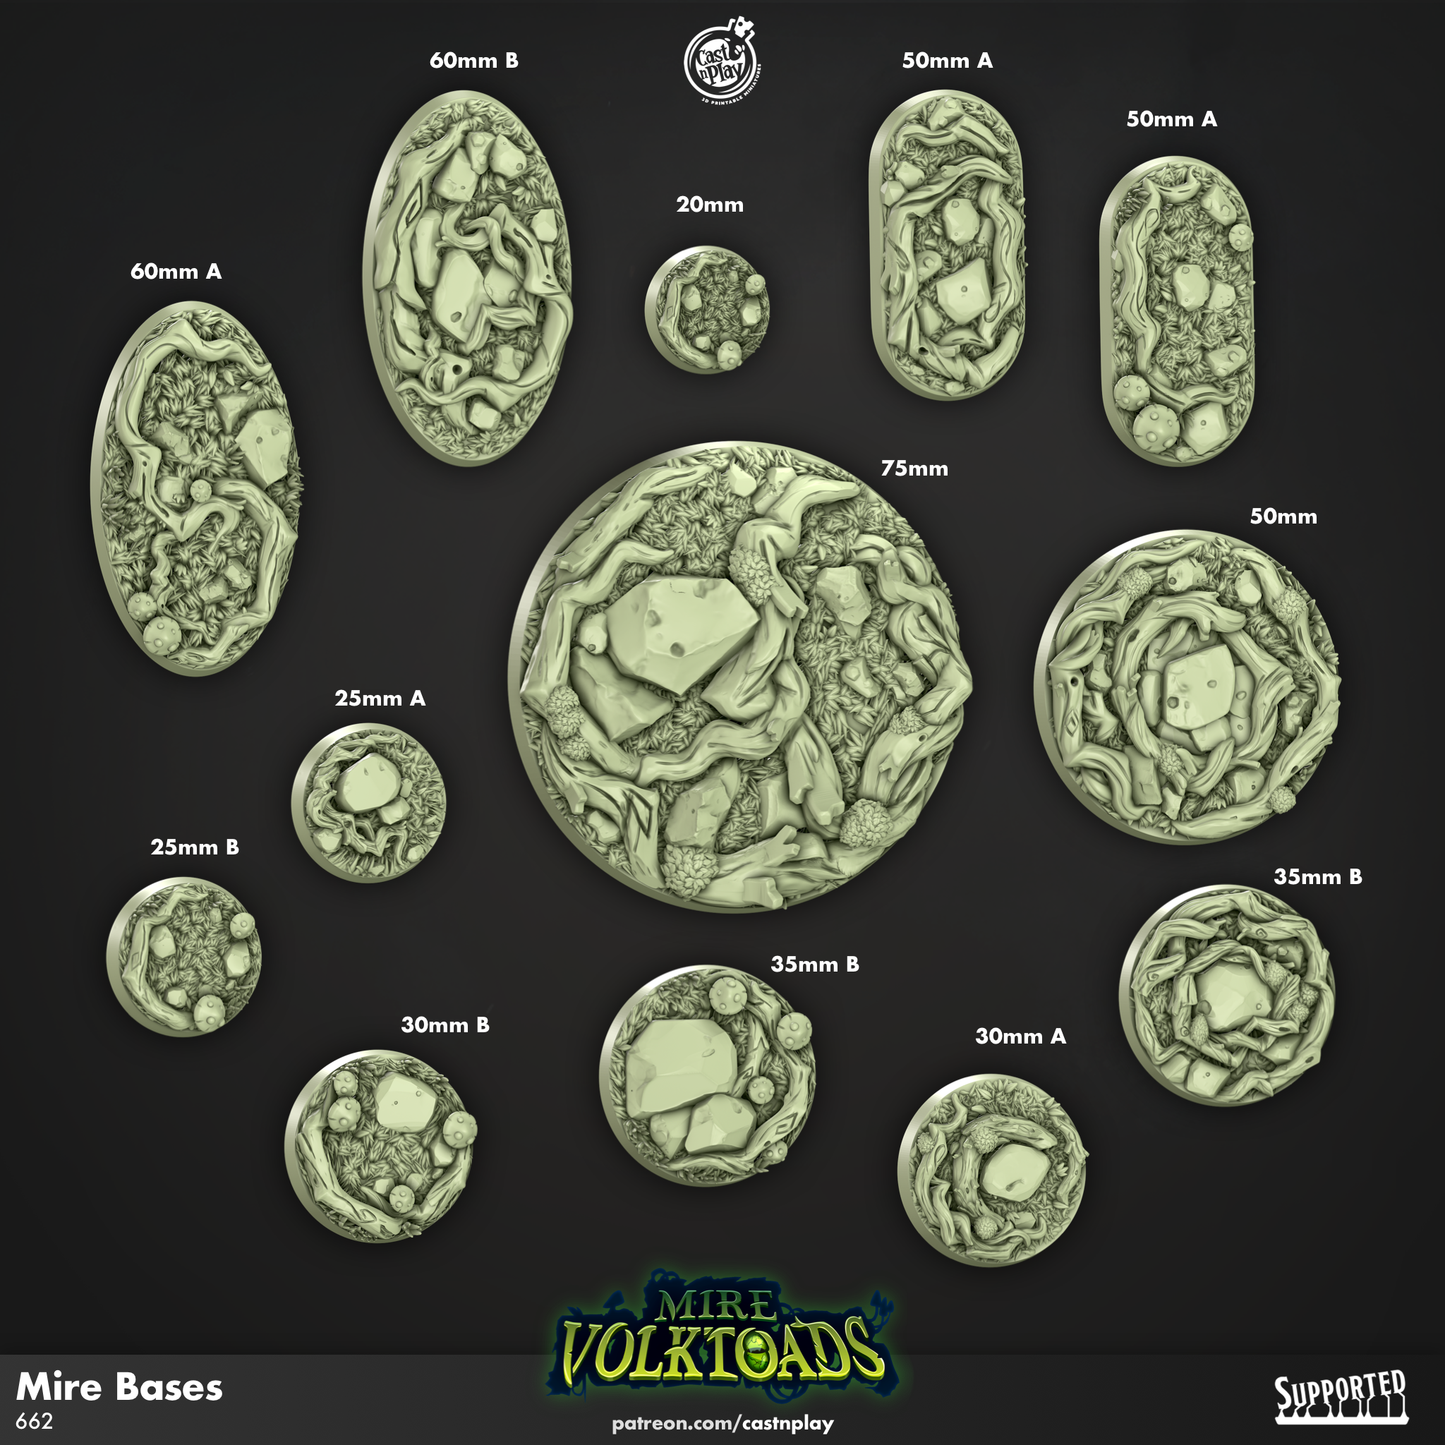 Mire Bases - Mire Volktoads | Cast N Play | Resin